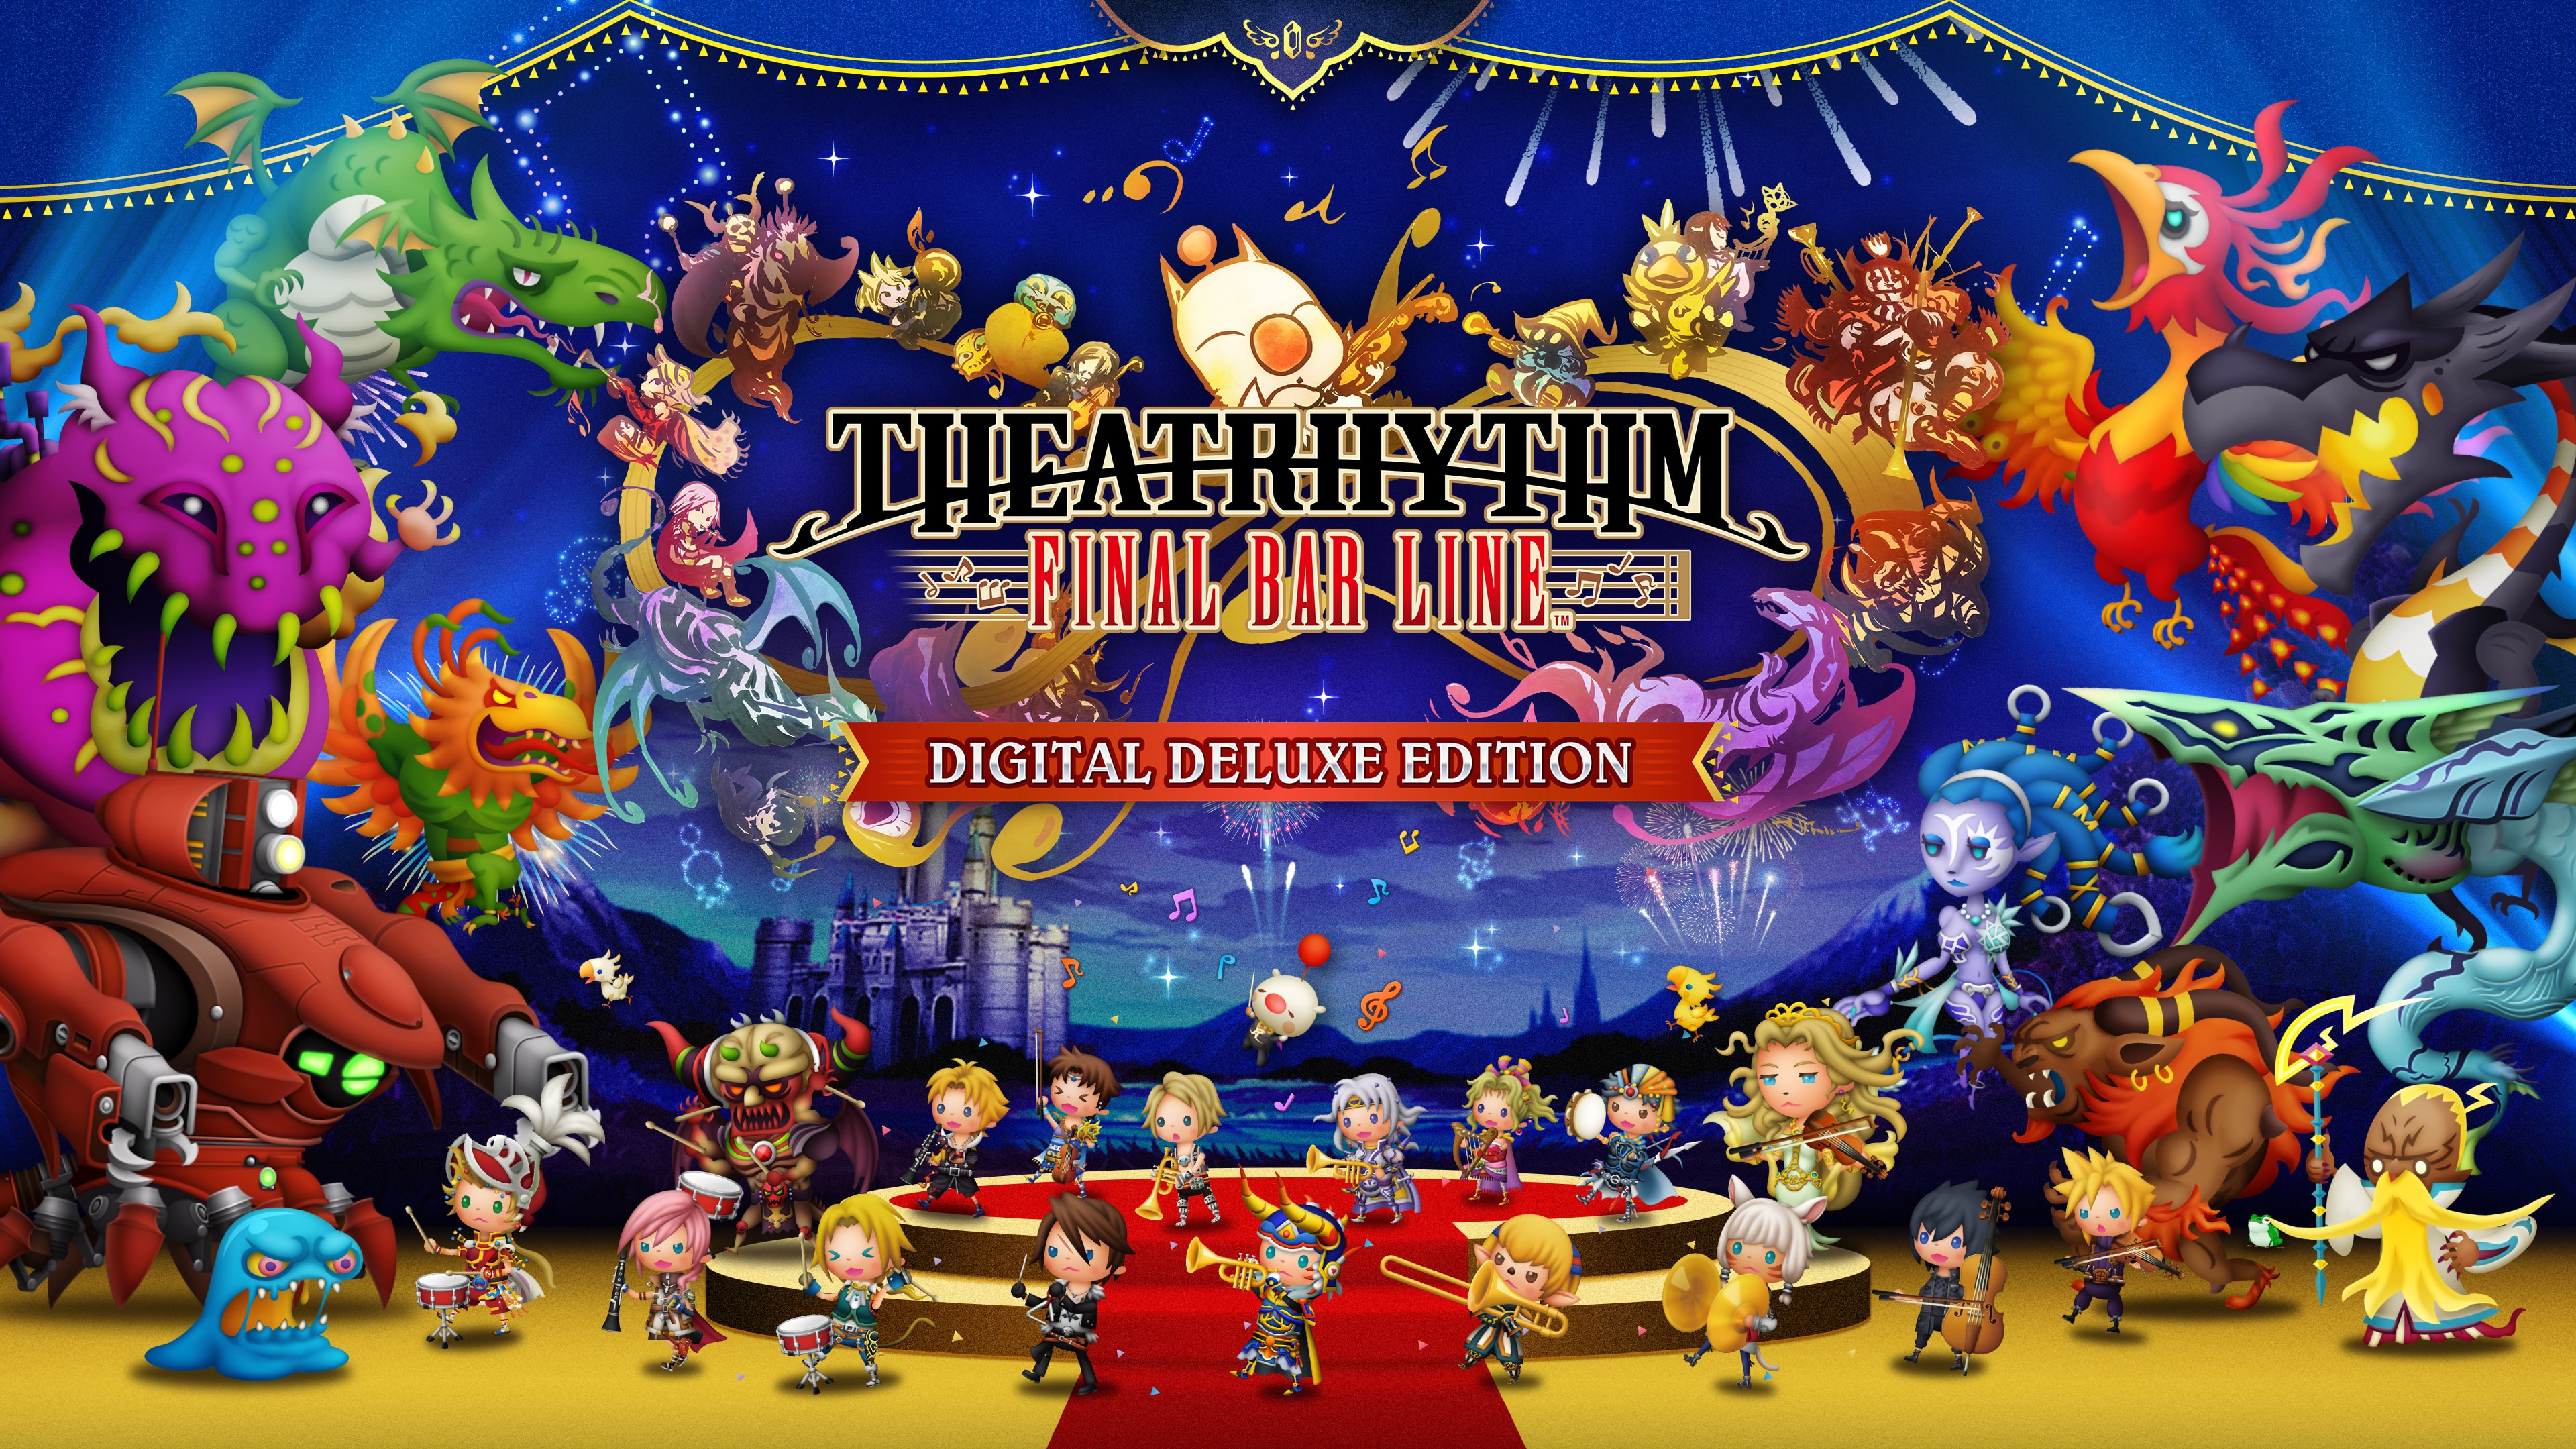 THEATRHYTHM FINAL BAR LINE Digital Deluxe Edition (Simplified Chinese, English, Korean, Japanese, Traditional Chinese)